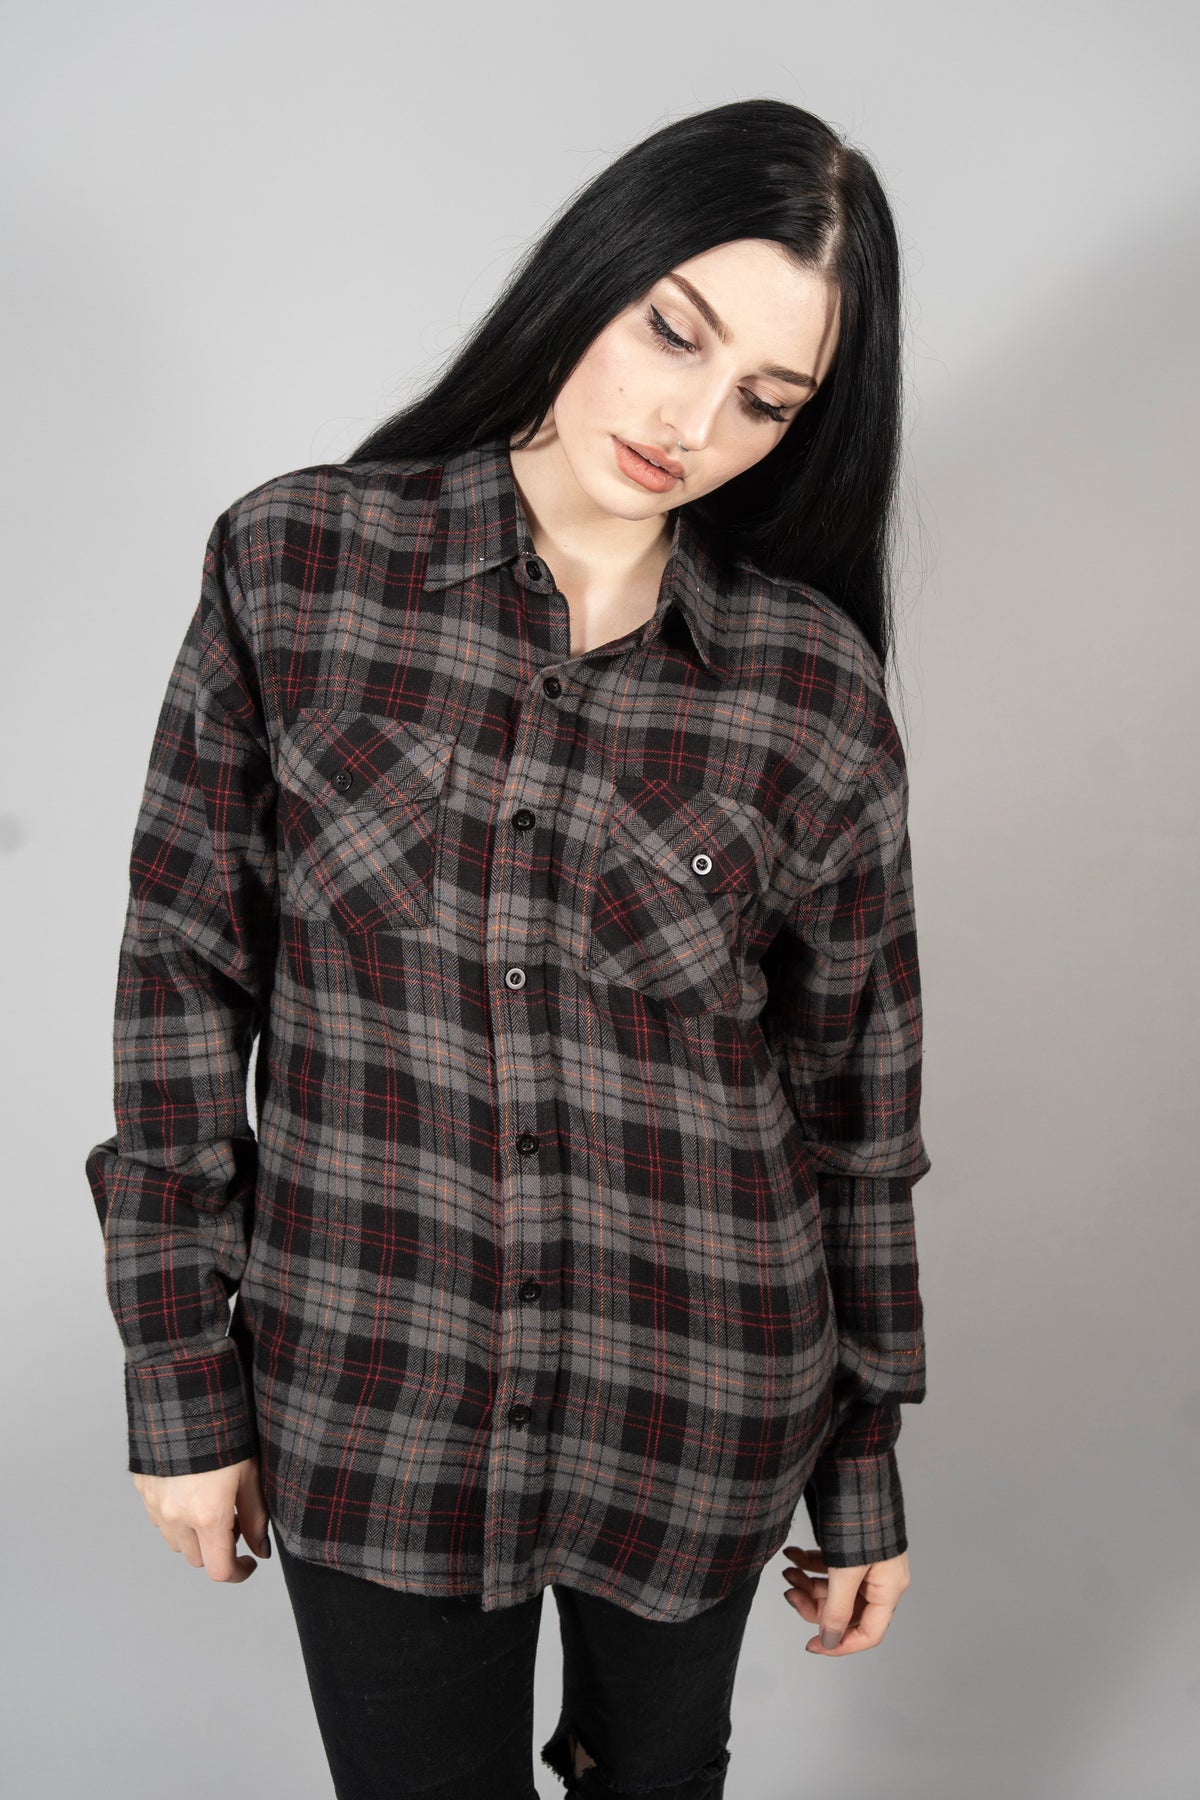 Unisex Moon Phase Flannel